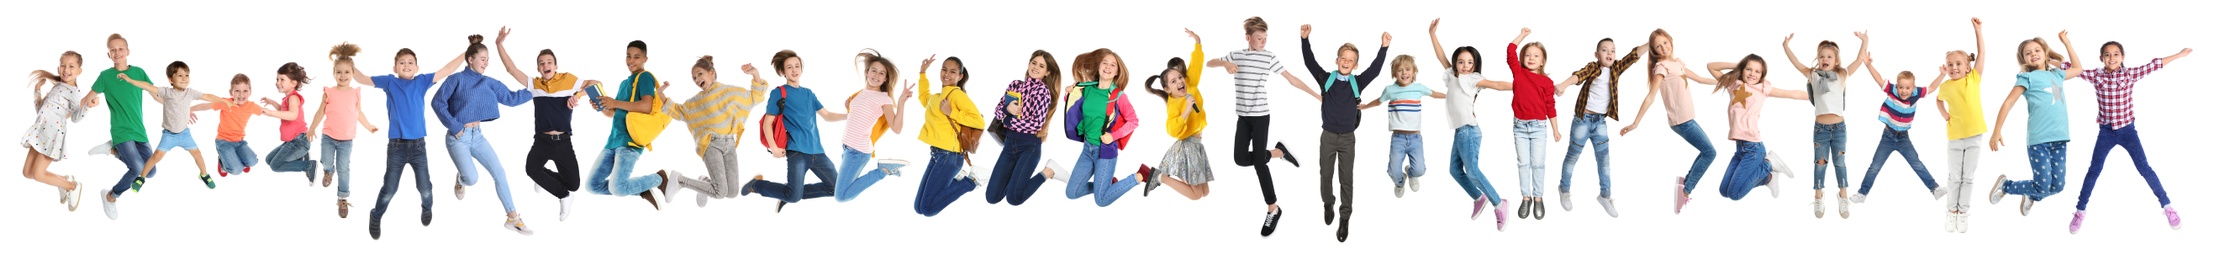 Image of Collage with photos of jumping children on white background. Banner design